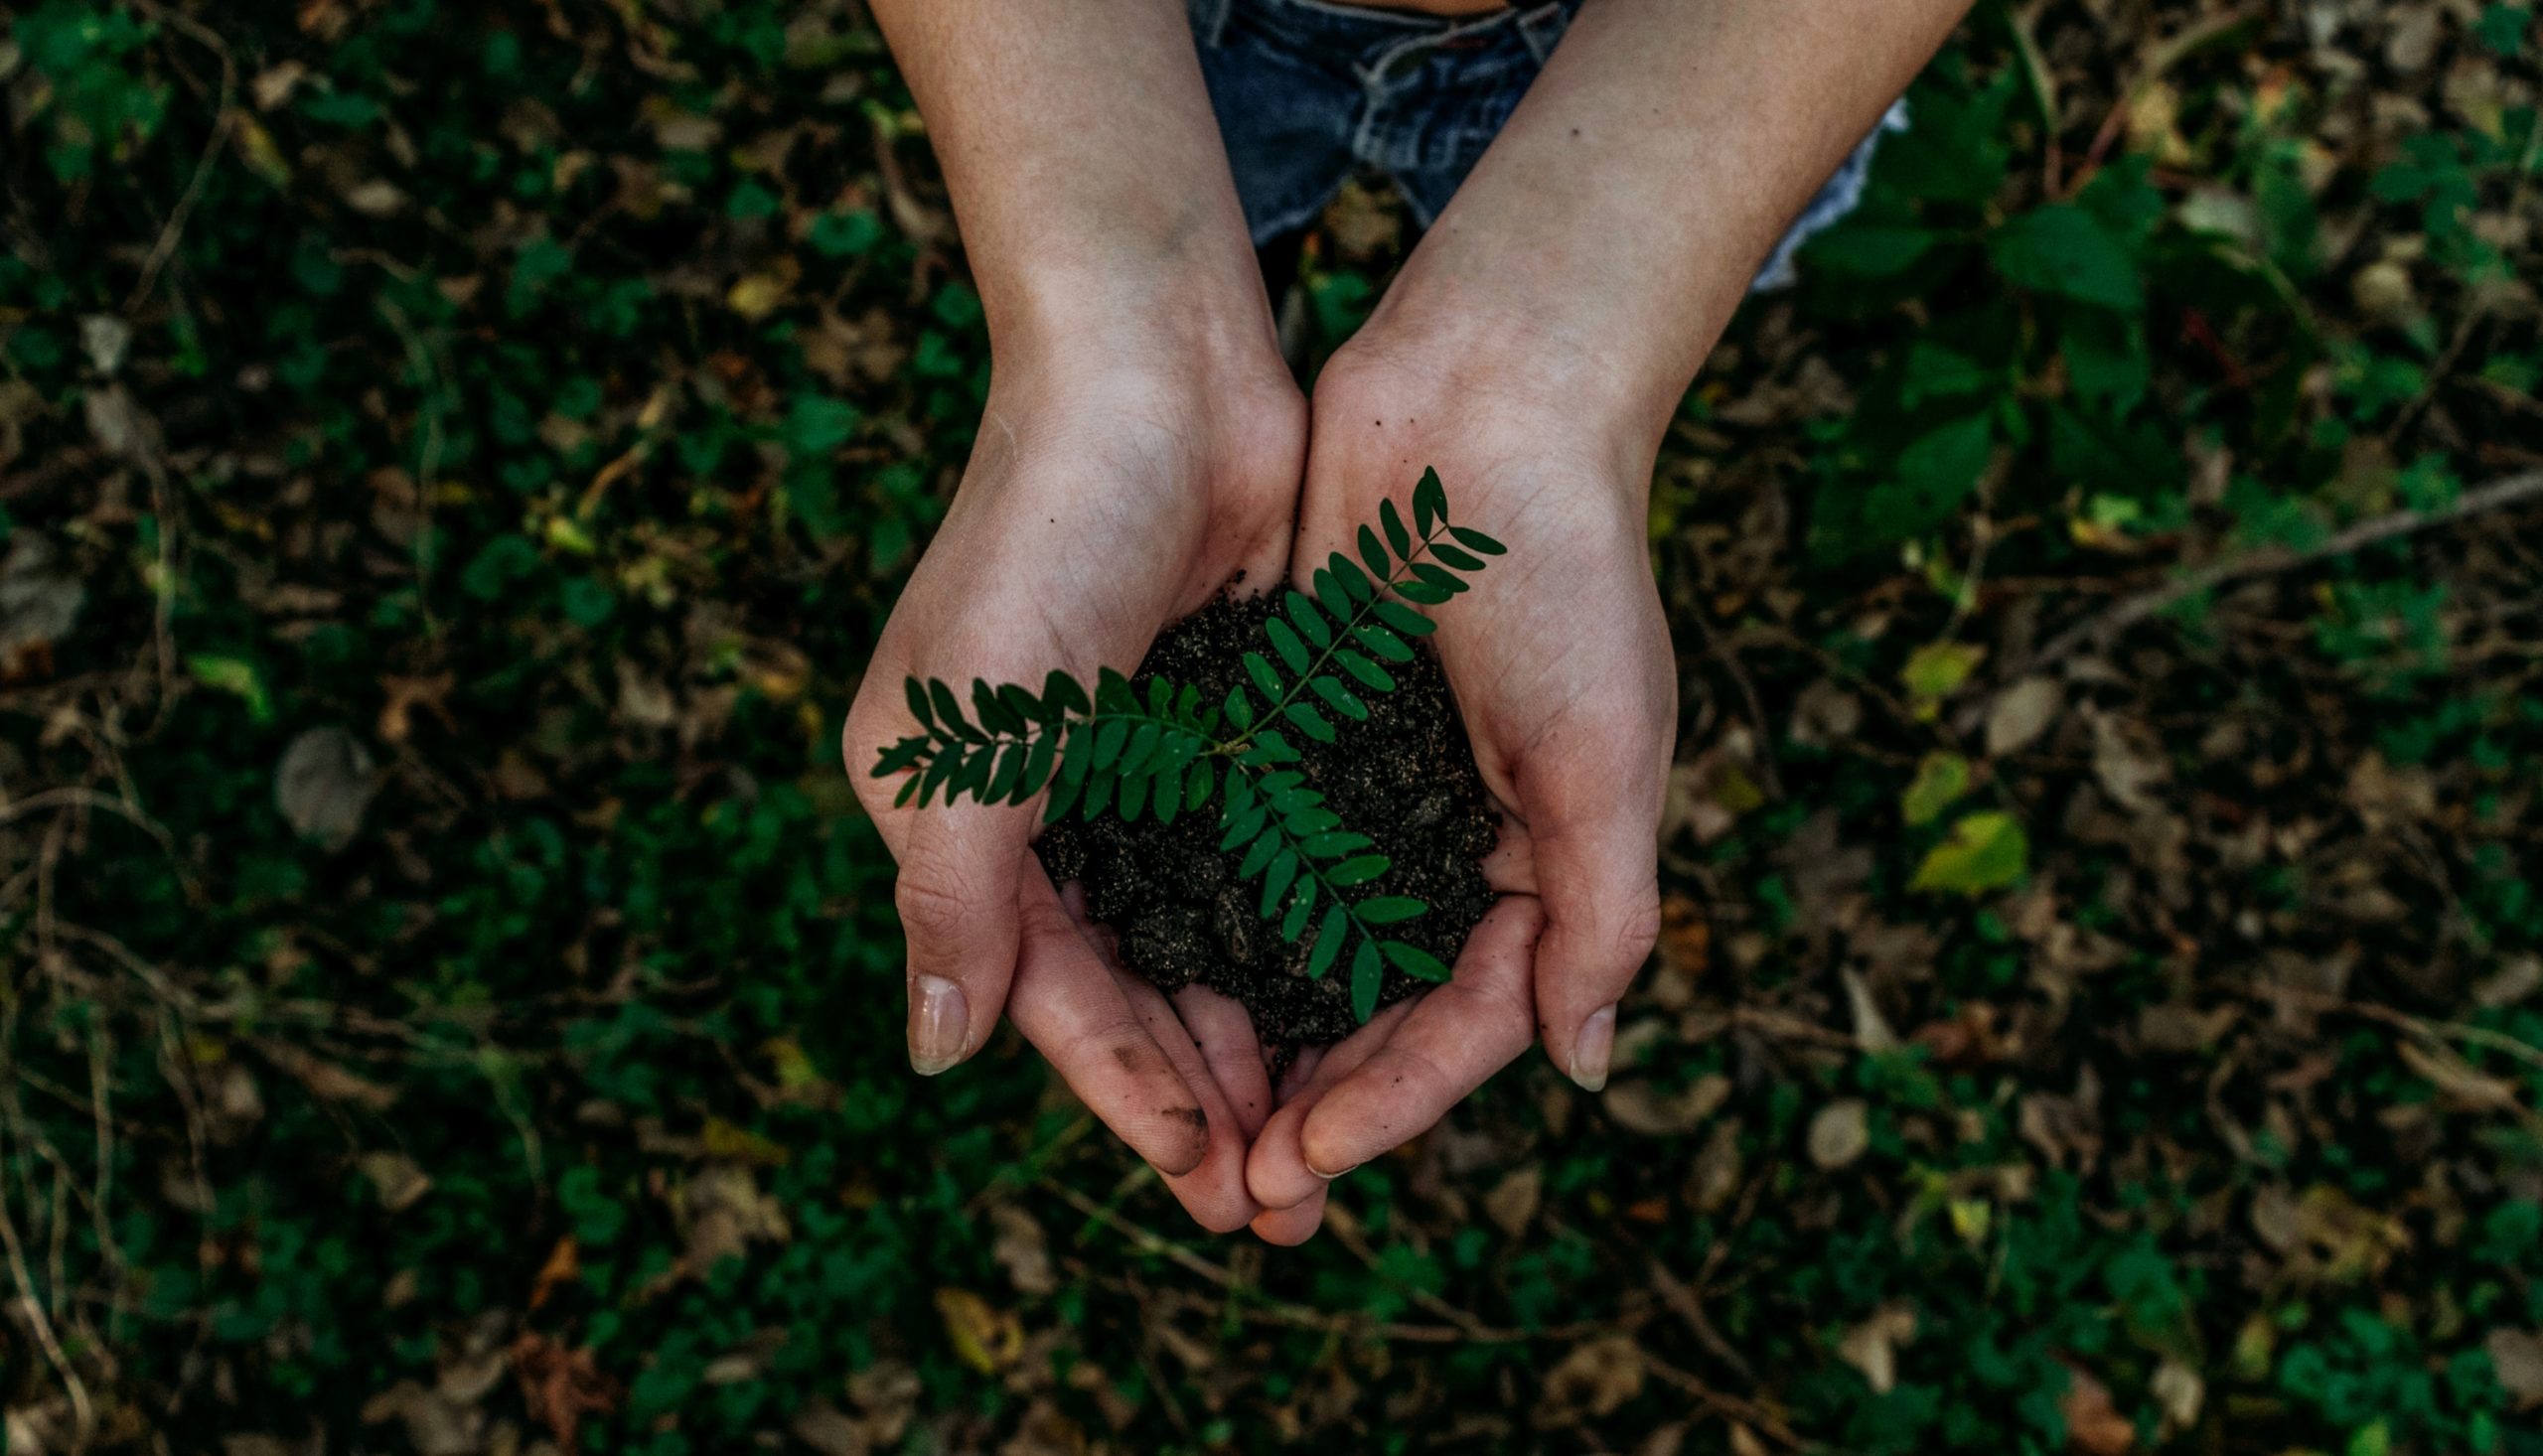 A sapling in a pair of hands. PD, image from https://unsplash.com/photos/x8ZStukS2PM